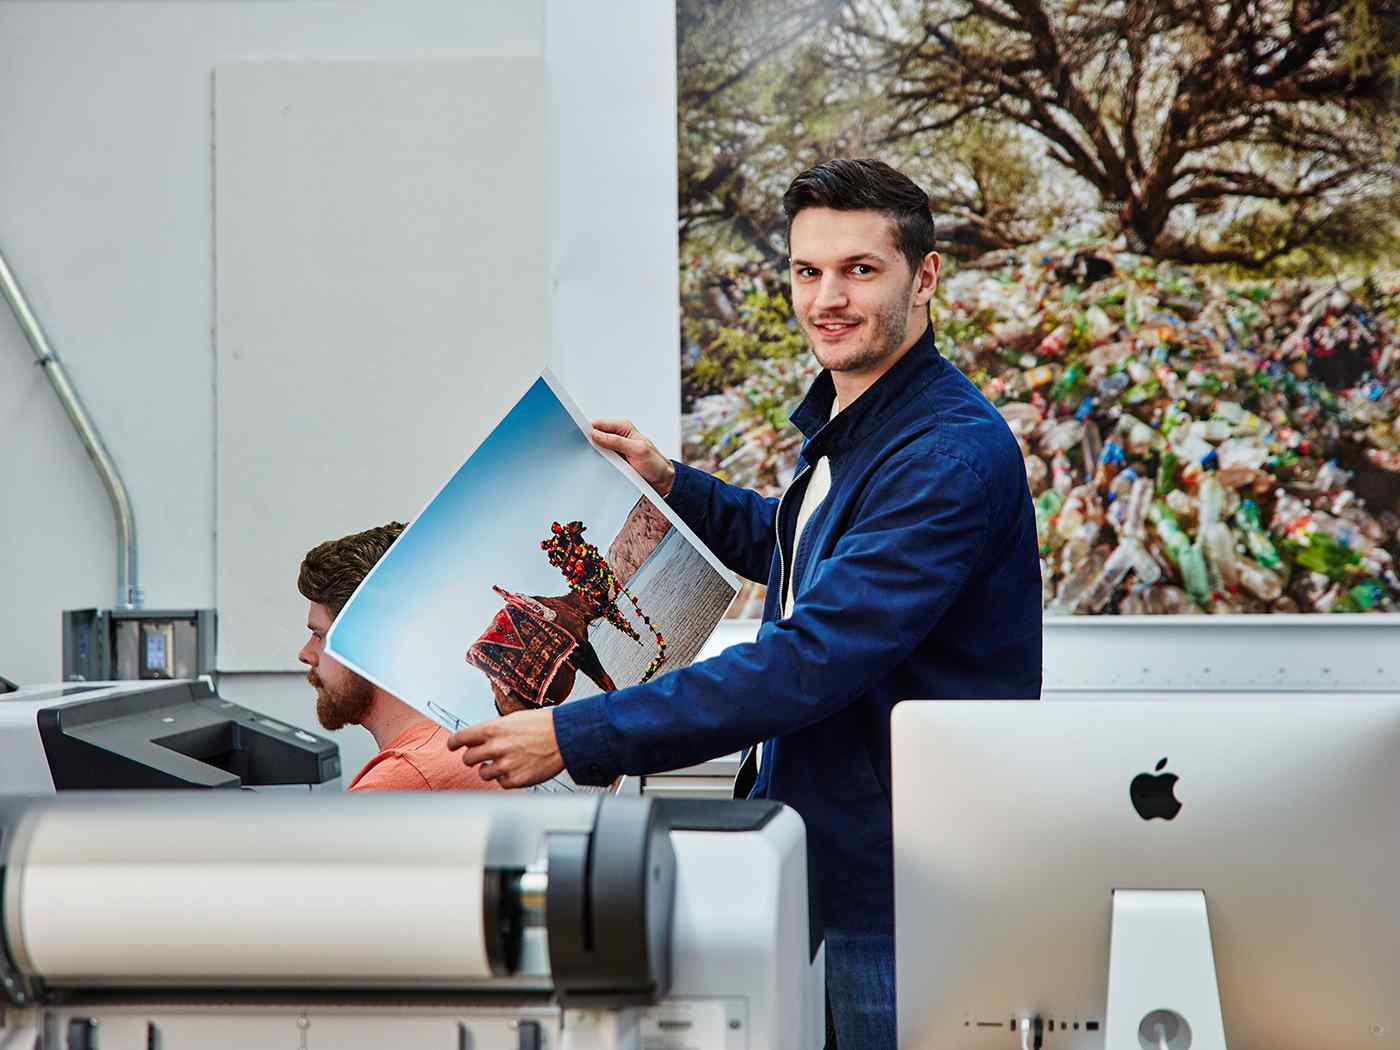 Communications student looking over a large printed photo. 